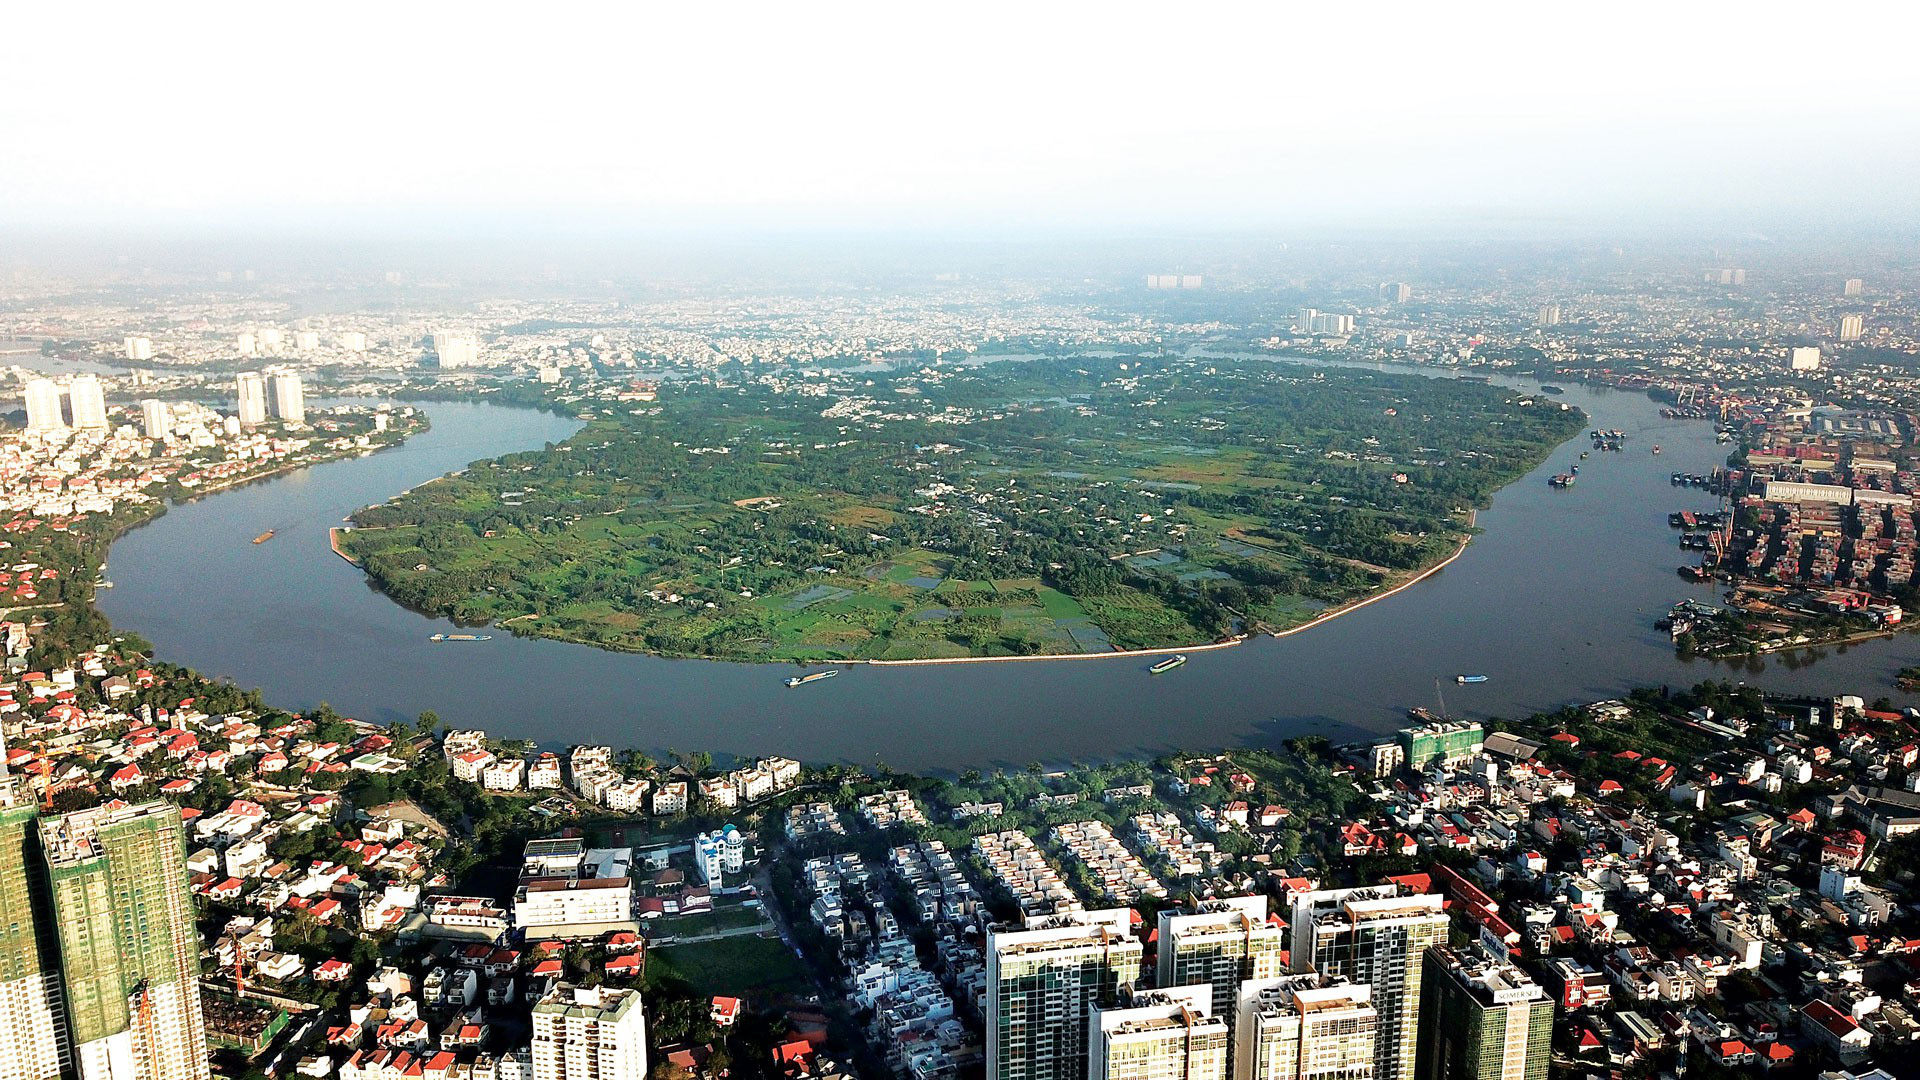 Research group proposes ecological park transformation in Ho Chi Minh City peninsula